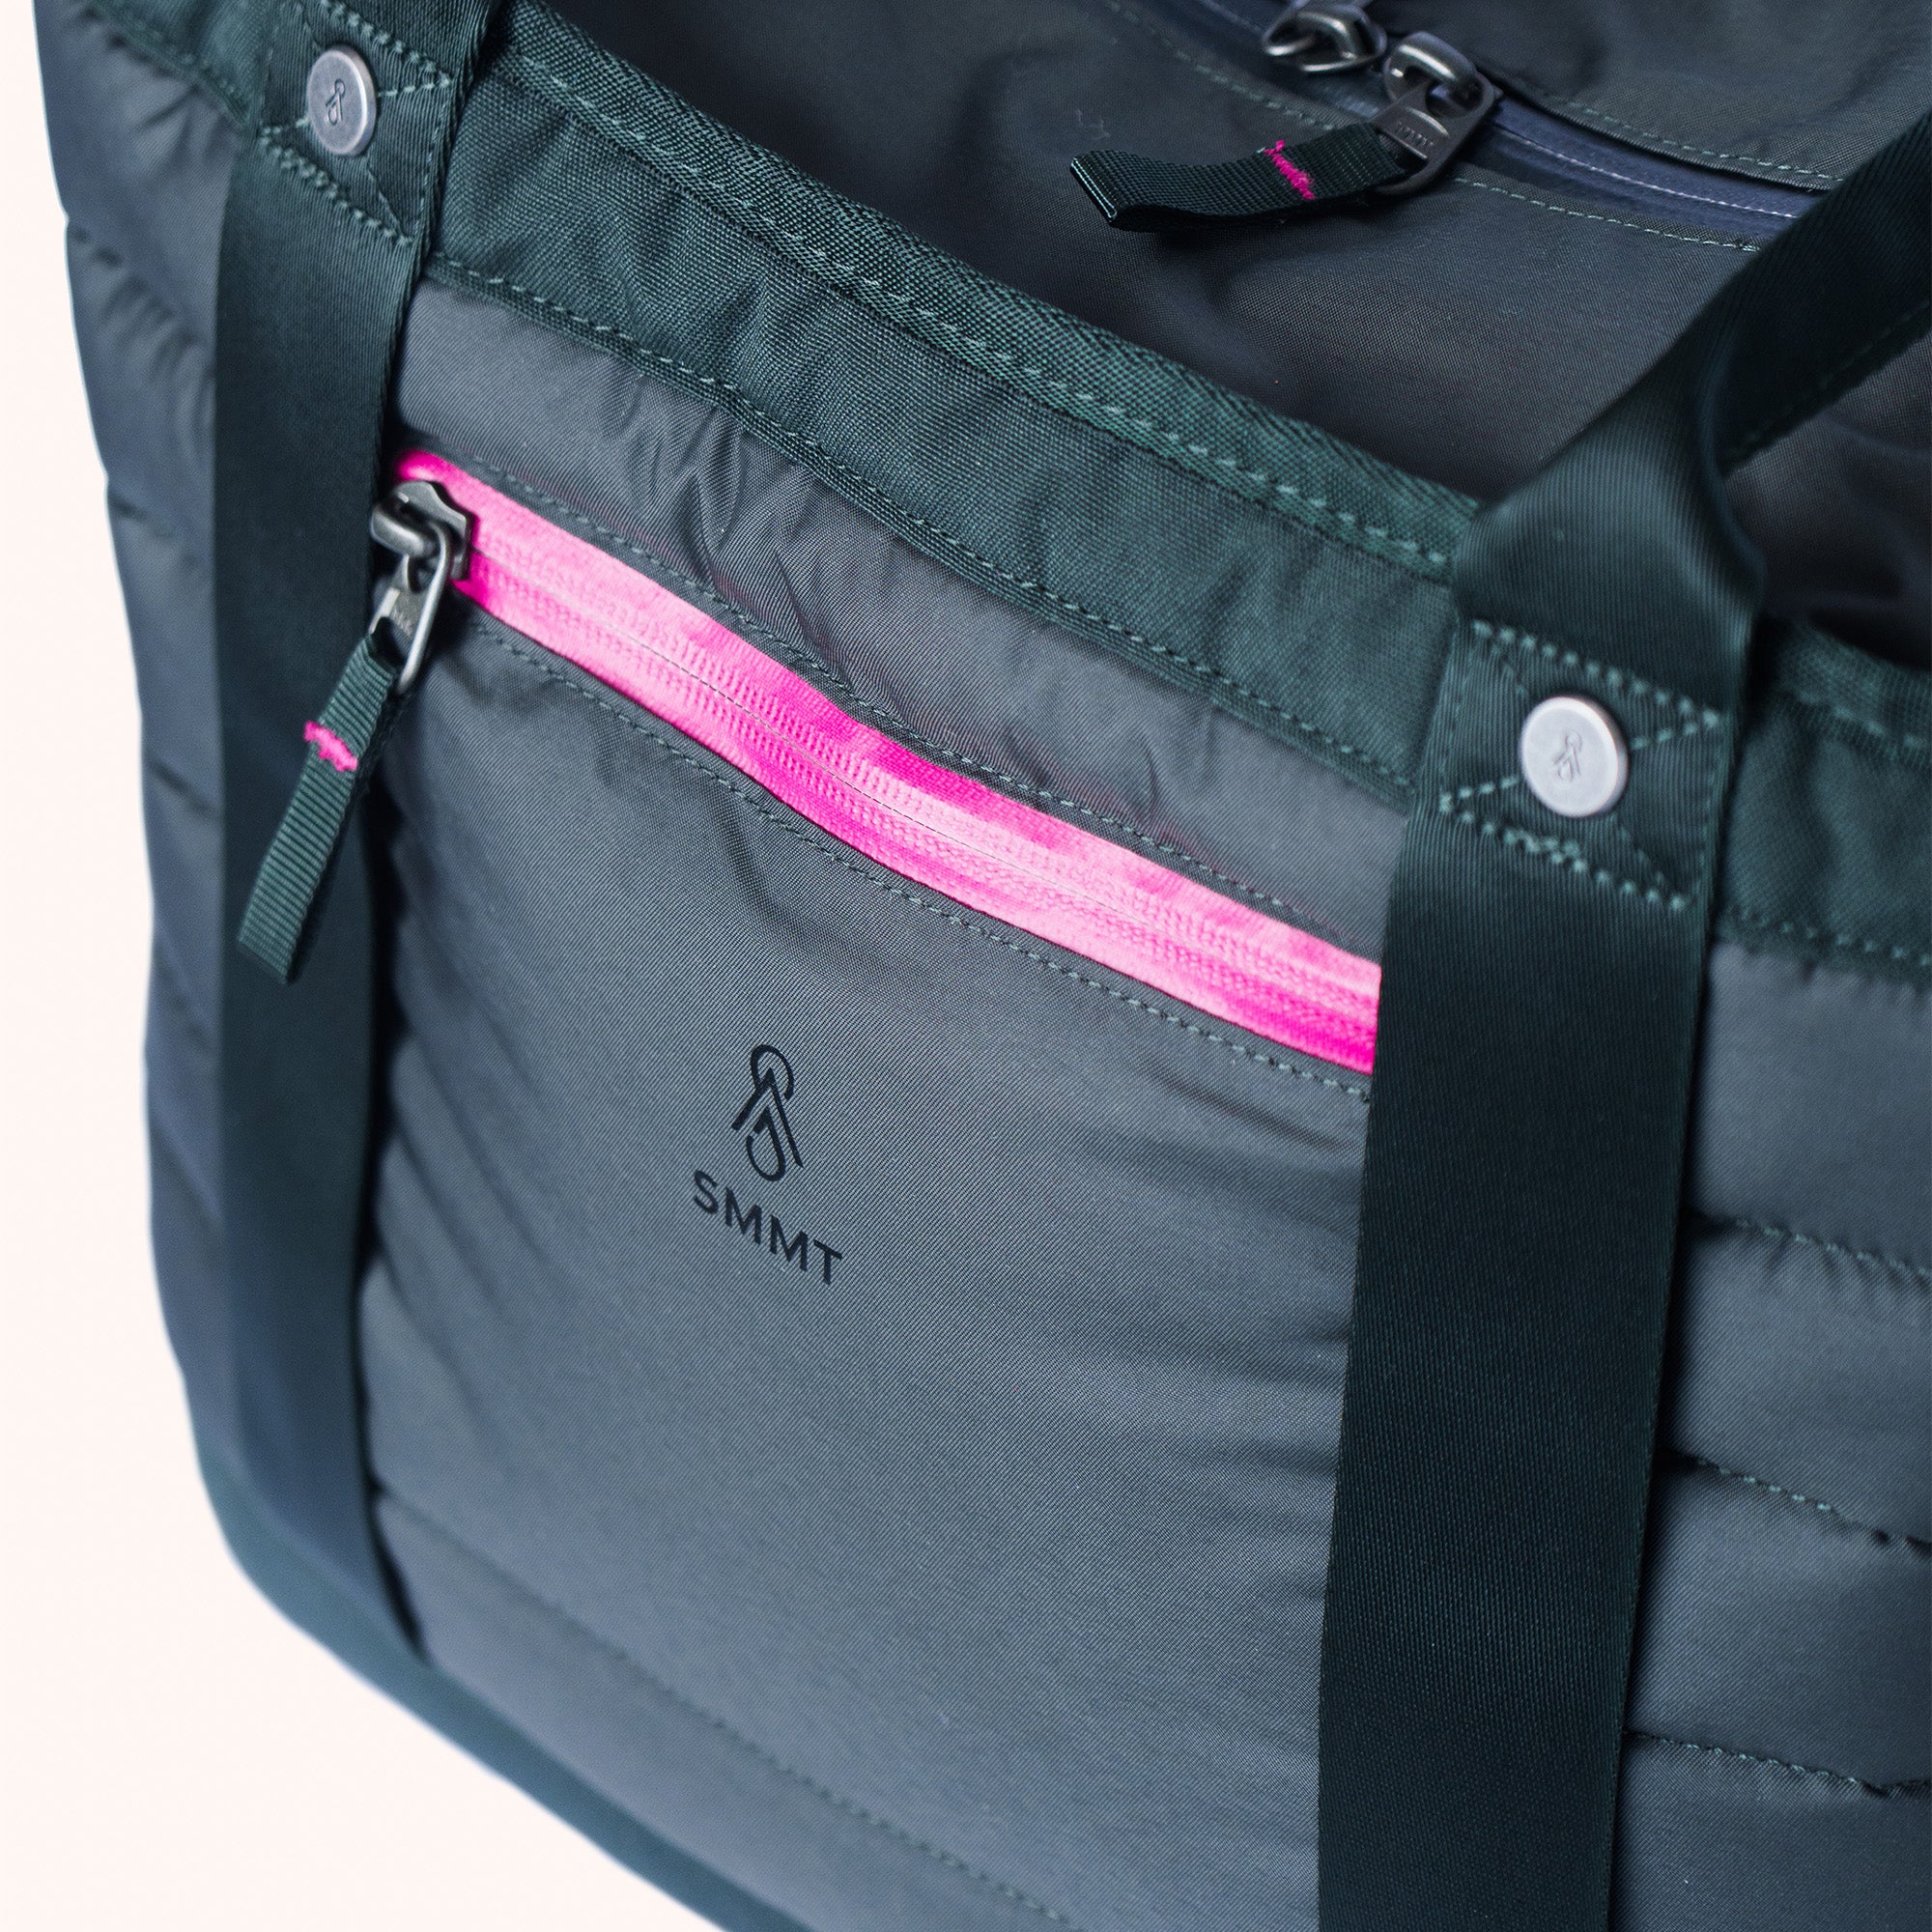 pink zipper detail on outside of tote bag